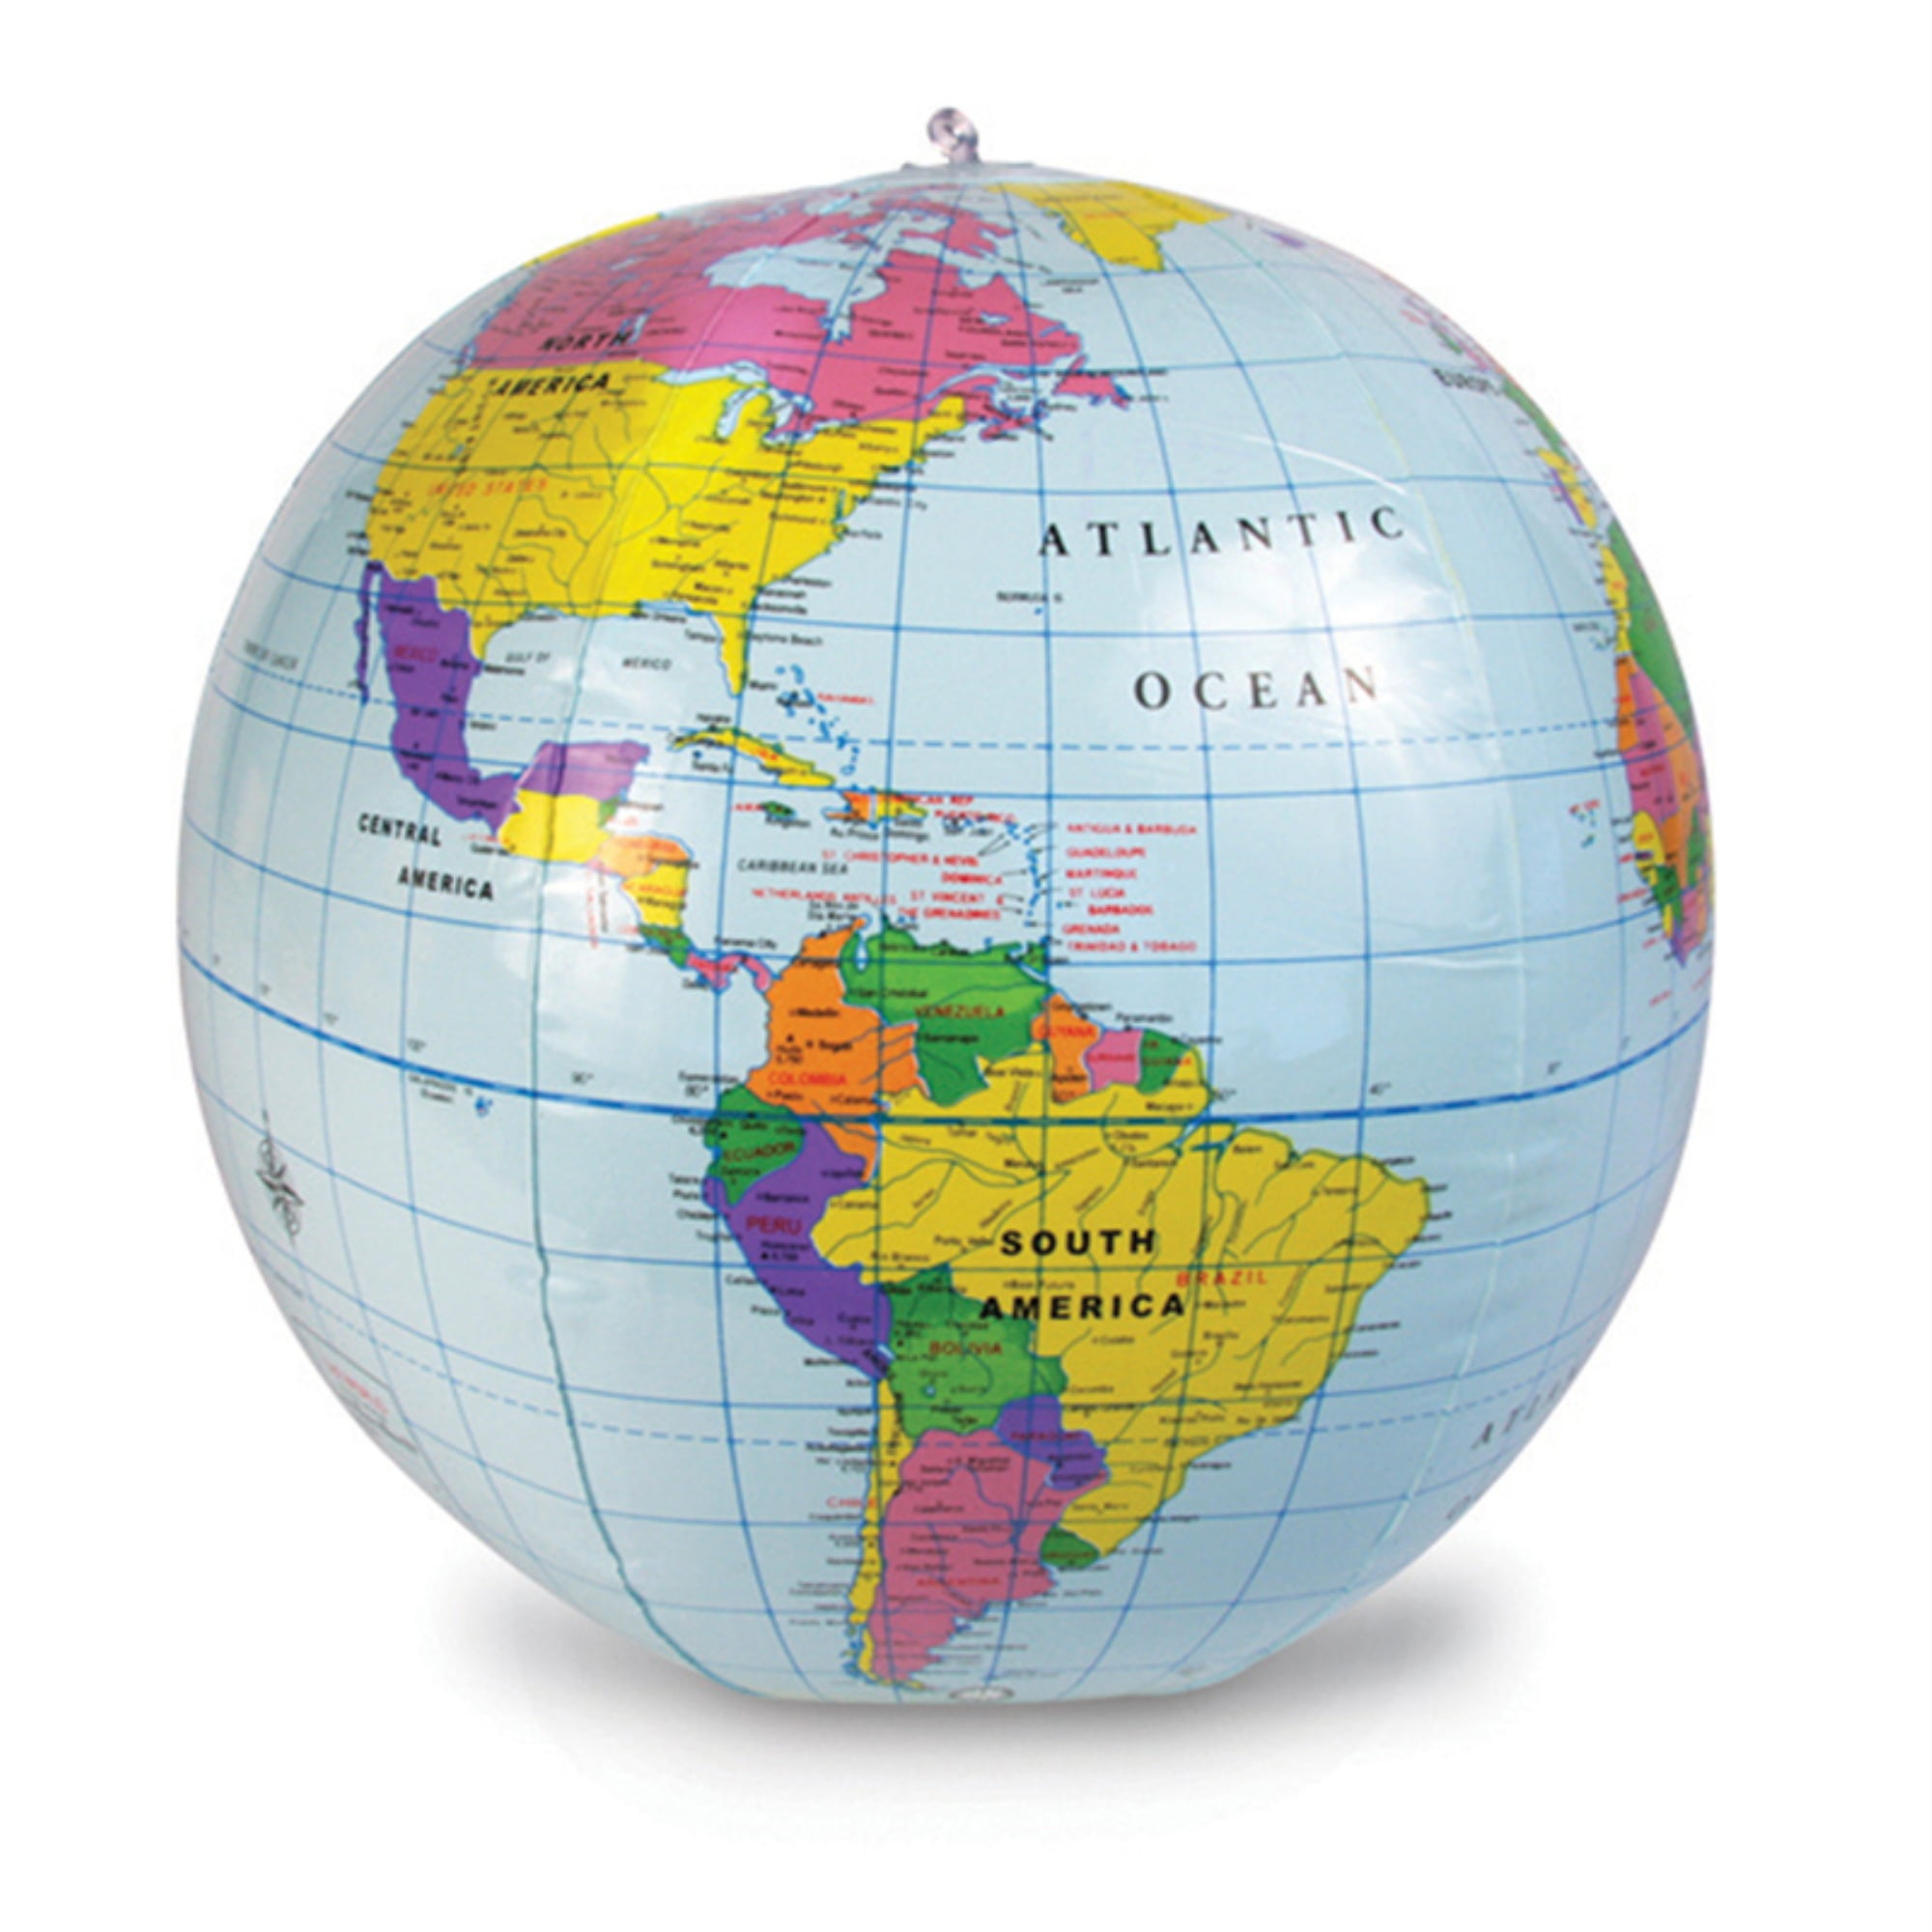 Free Shipping with 6 or more items 1 Inflatable 11" World Globe 